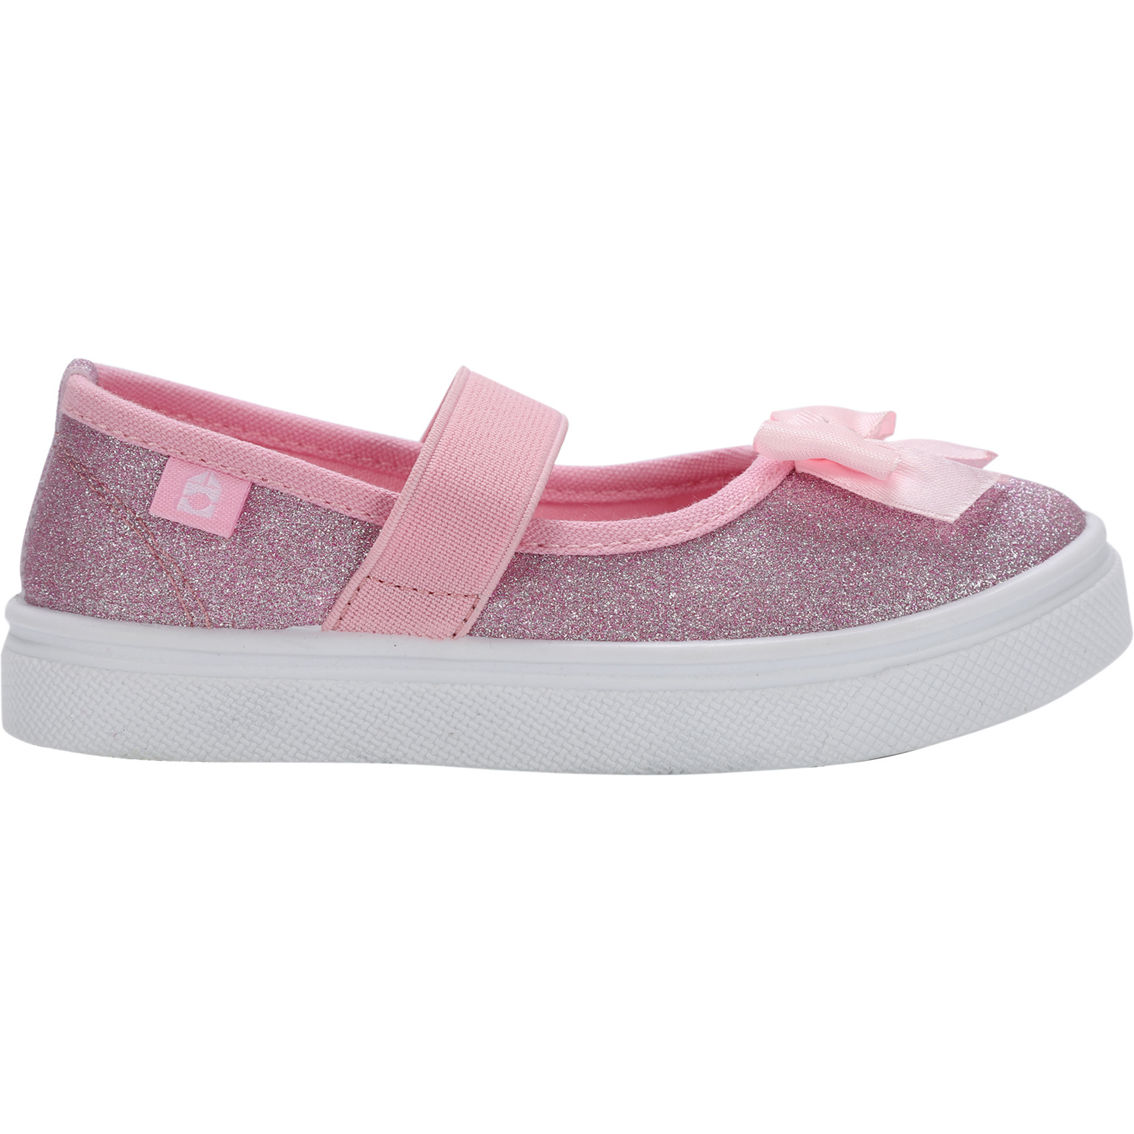 Oomphies Toddler Girls Quinn Mary Jane Shoes - Image 2 of 4